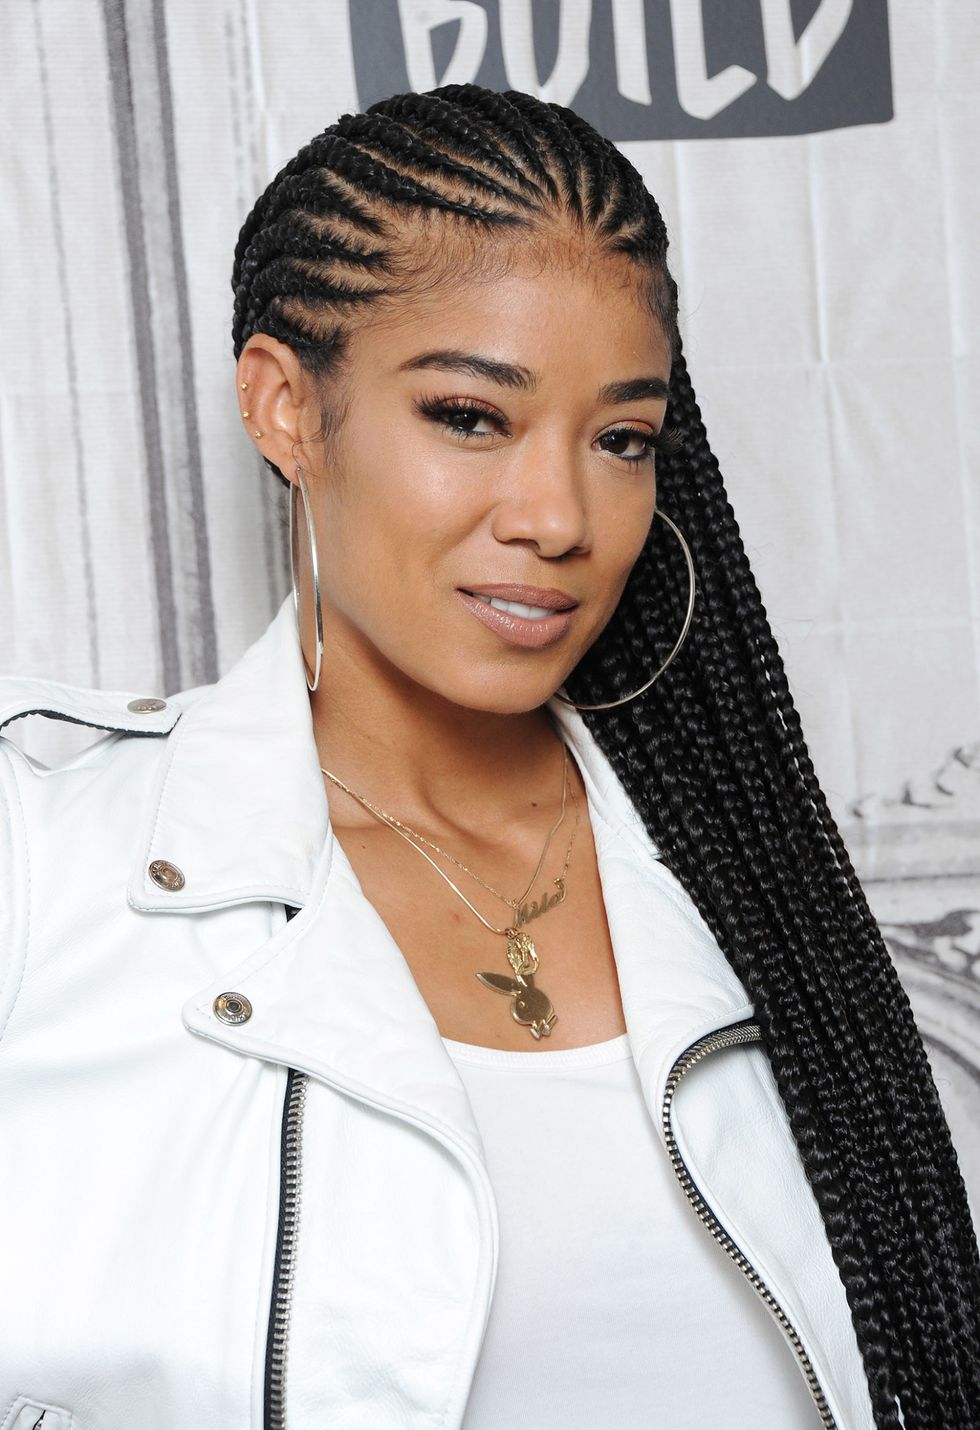 <p><span>"Feed in" braids (I call them invisible braids) are different from regular cornrows with extensions because they don't have a knot at the start of the braid and looks more natural," explains Dr. Kari. "This technique is a </span><em data-redactor-tag="em">healthier</em><span> braid option because it allows the hair to grow out naturally, without the stress, tension and weight caused by the knot. It reduces incidents of breakage and hair loss when done properly."</span></p>